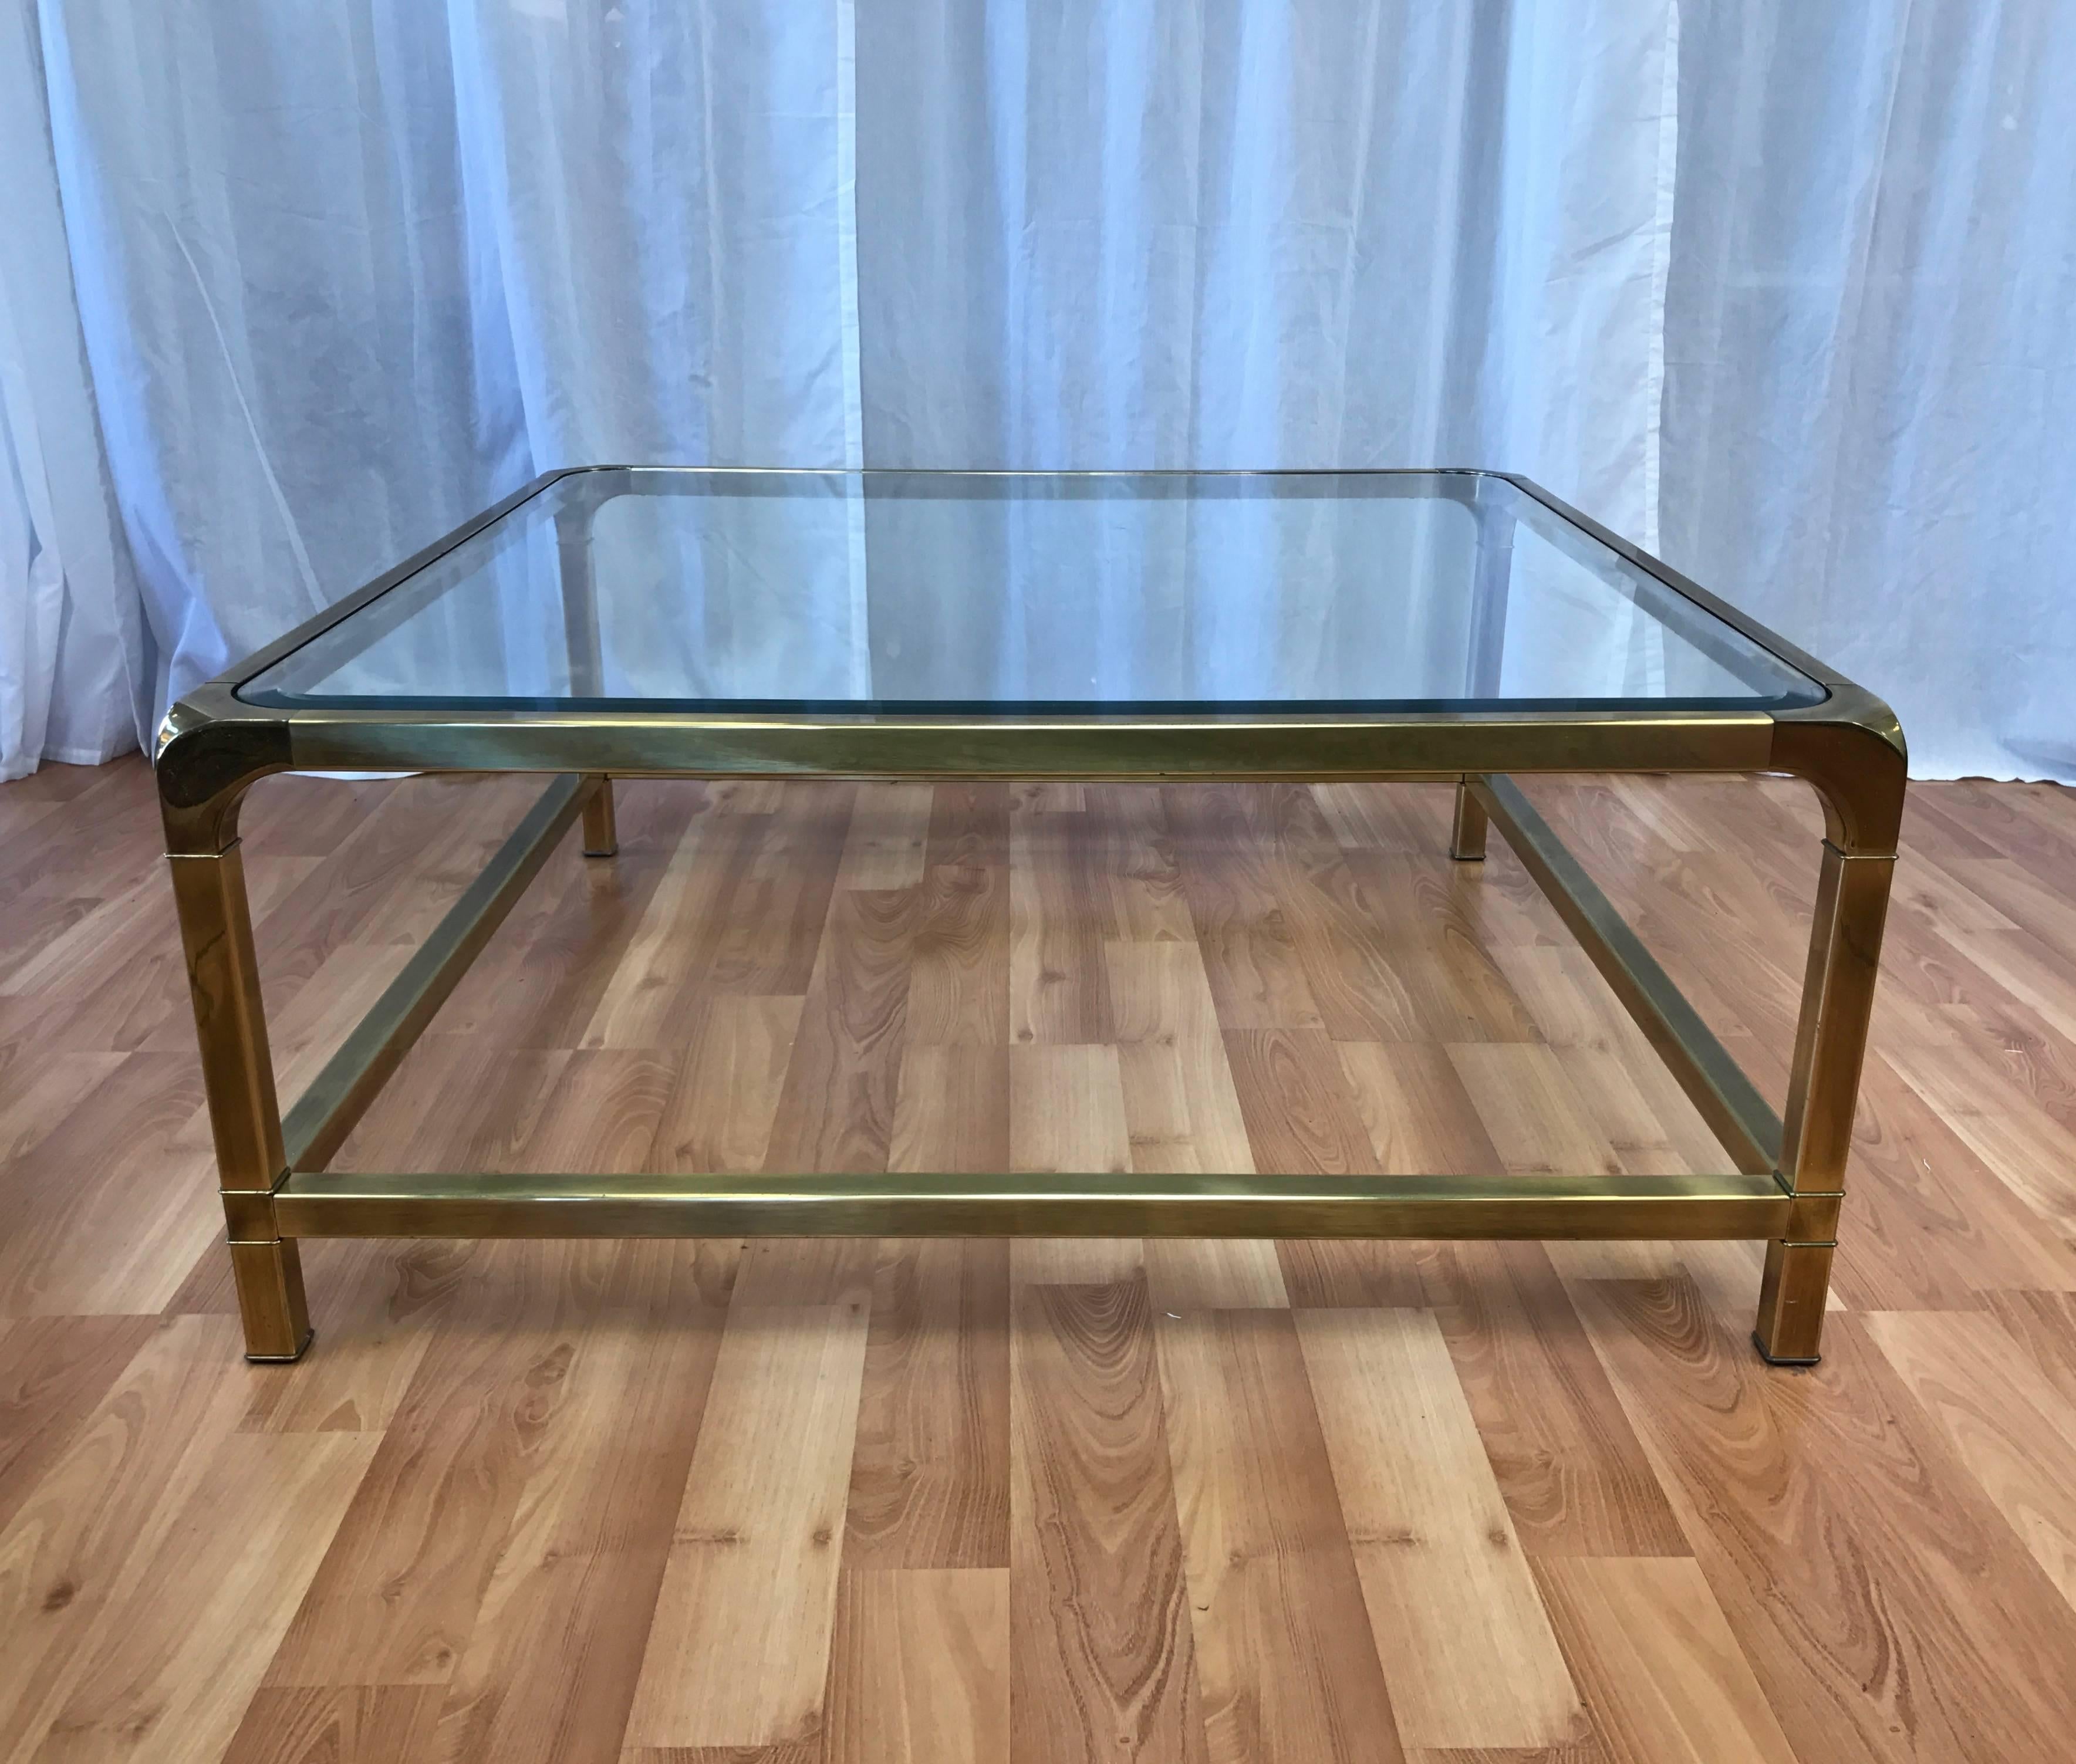 An extremely large square brass and glass coffee or cocktail table by Mastercraft.

Streamlined Hollywood Regency-inspired design displays Mastercraft’s signature waterfall corners, low spanners, and brass with a nicely subdued finish. Has